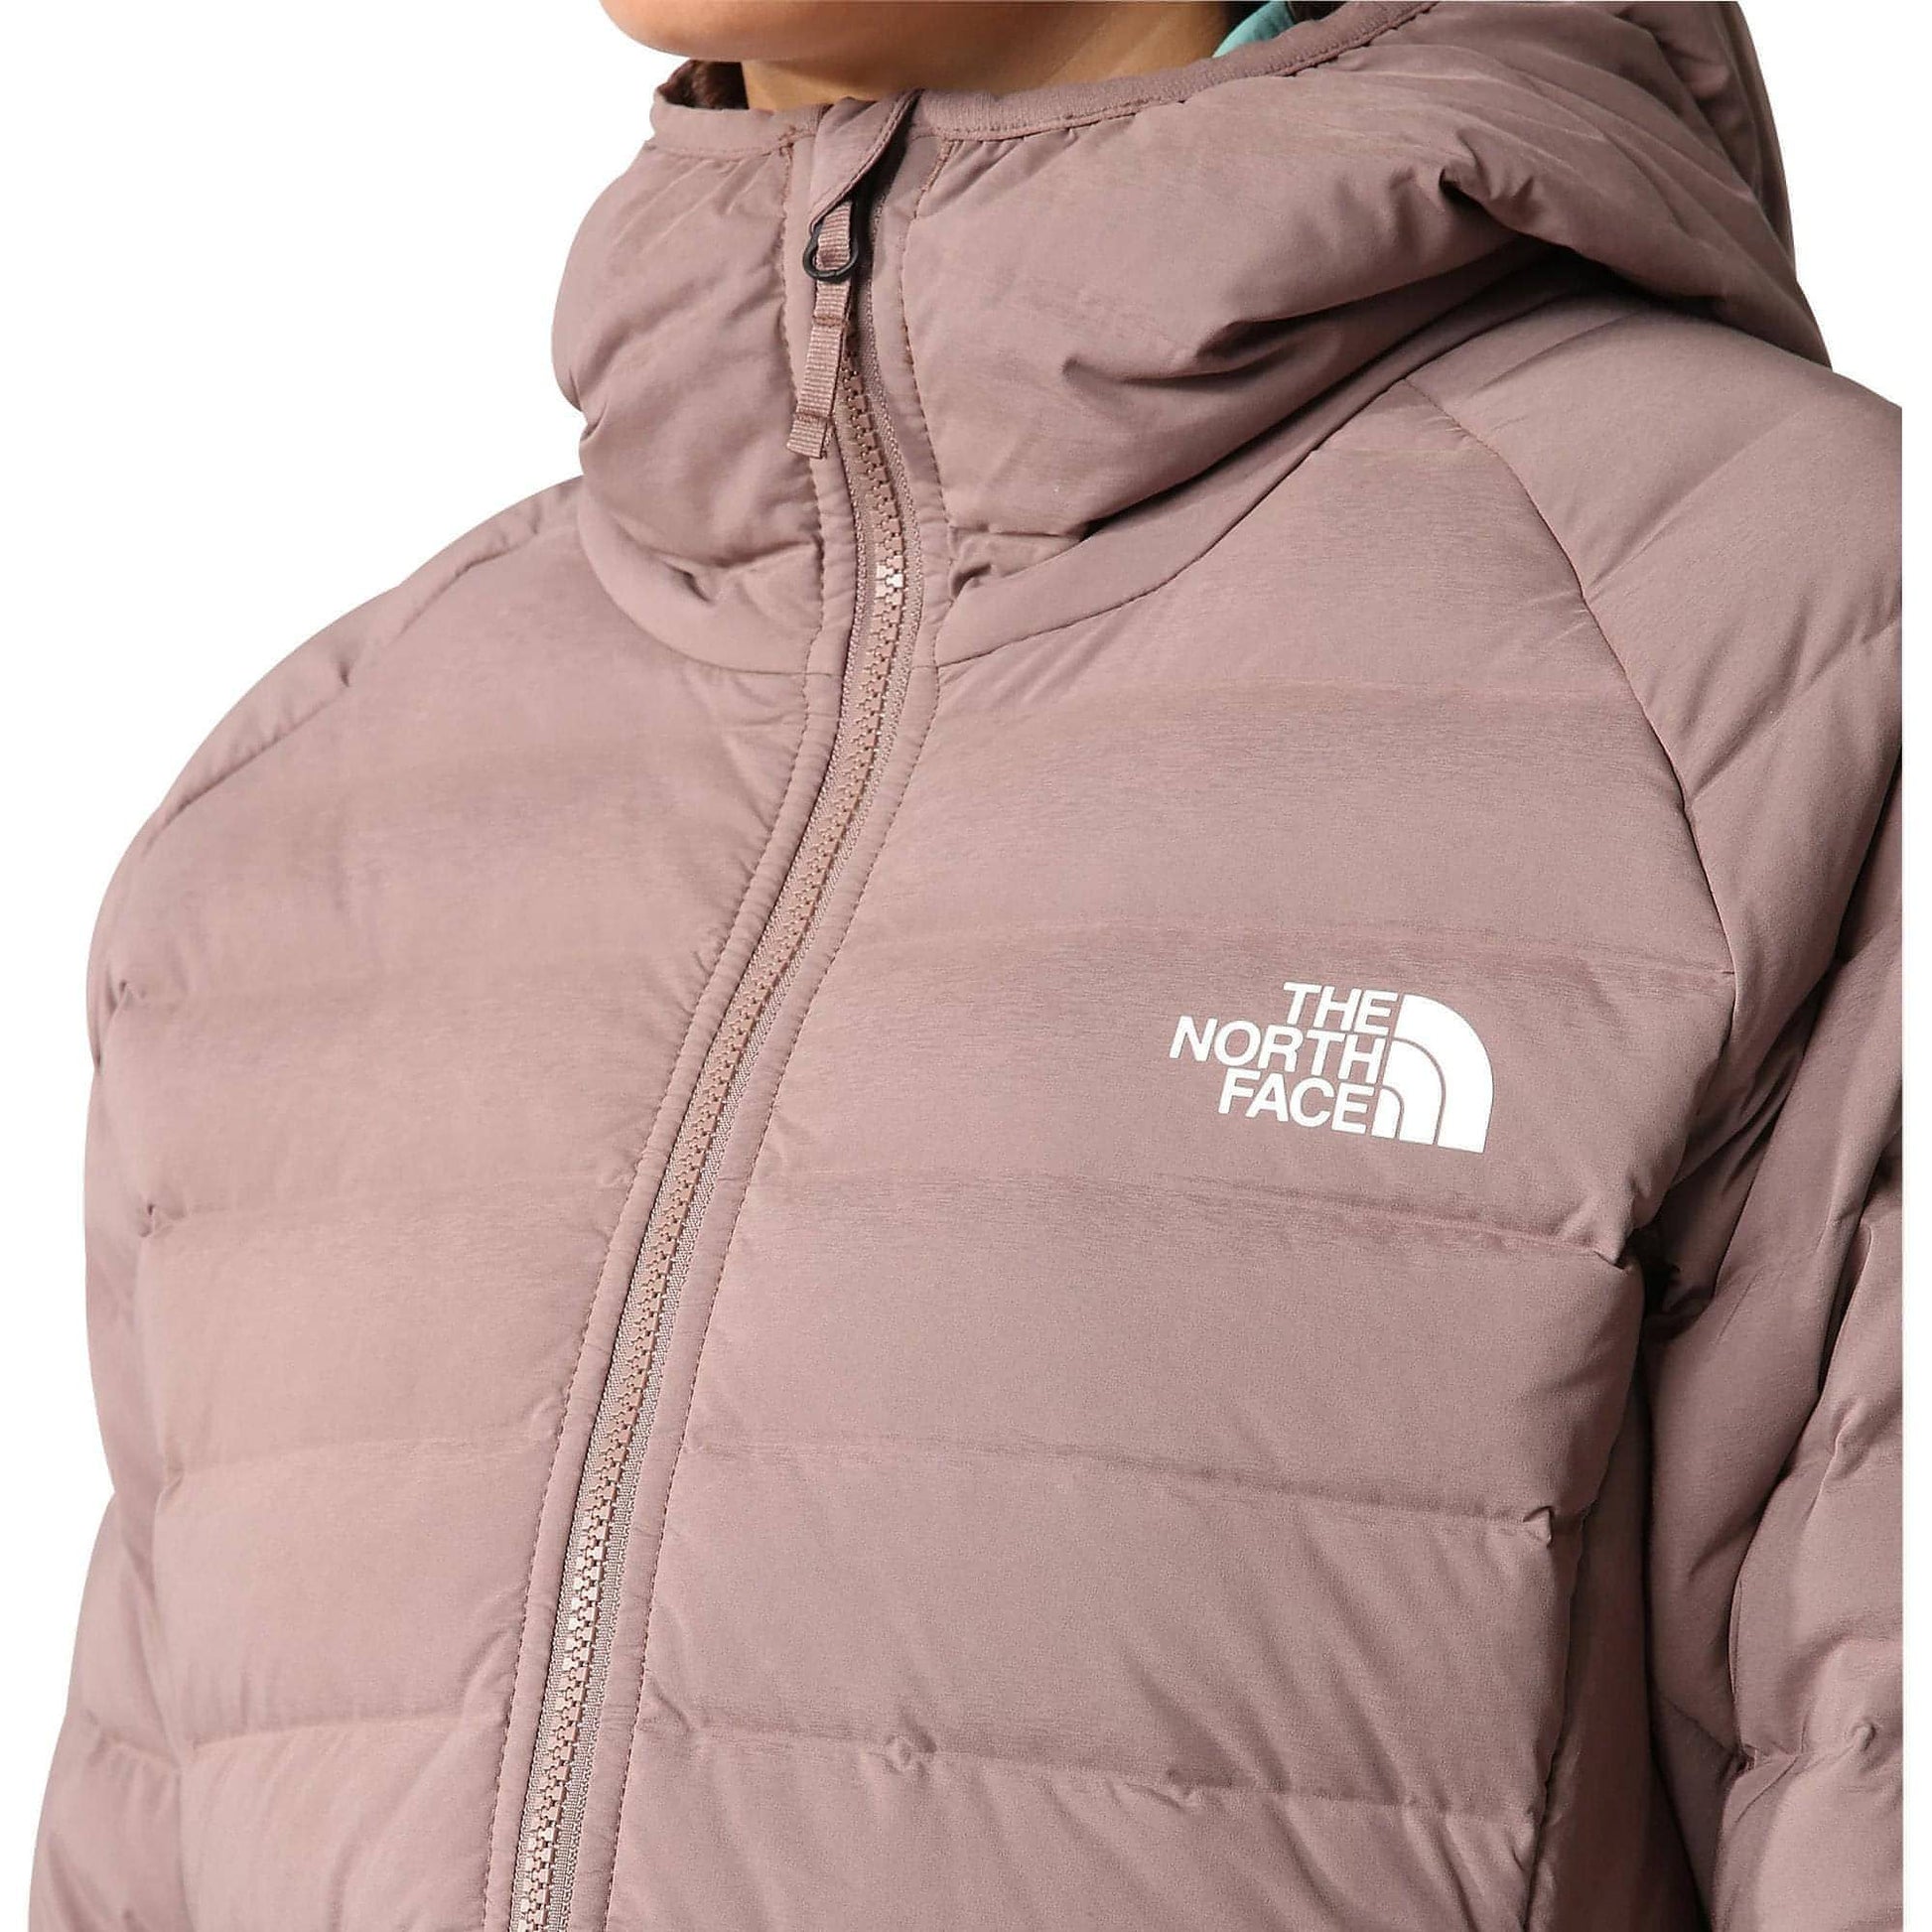 The North Face Belleview Stretch Down Jacket Nf0A7Uk5Efu1 Details